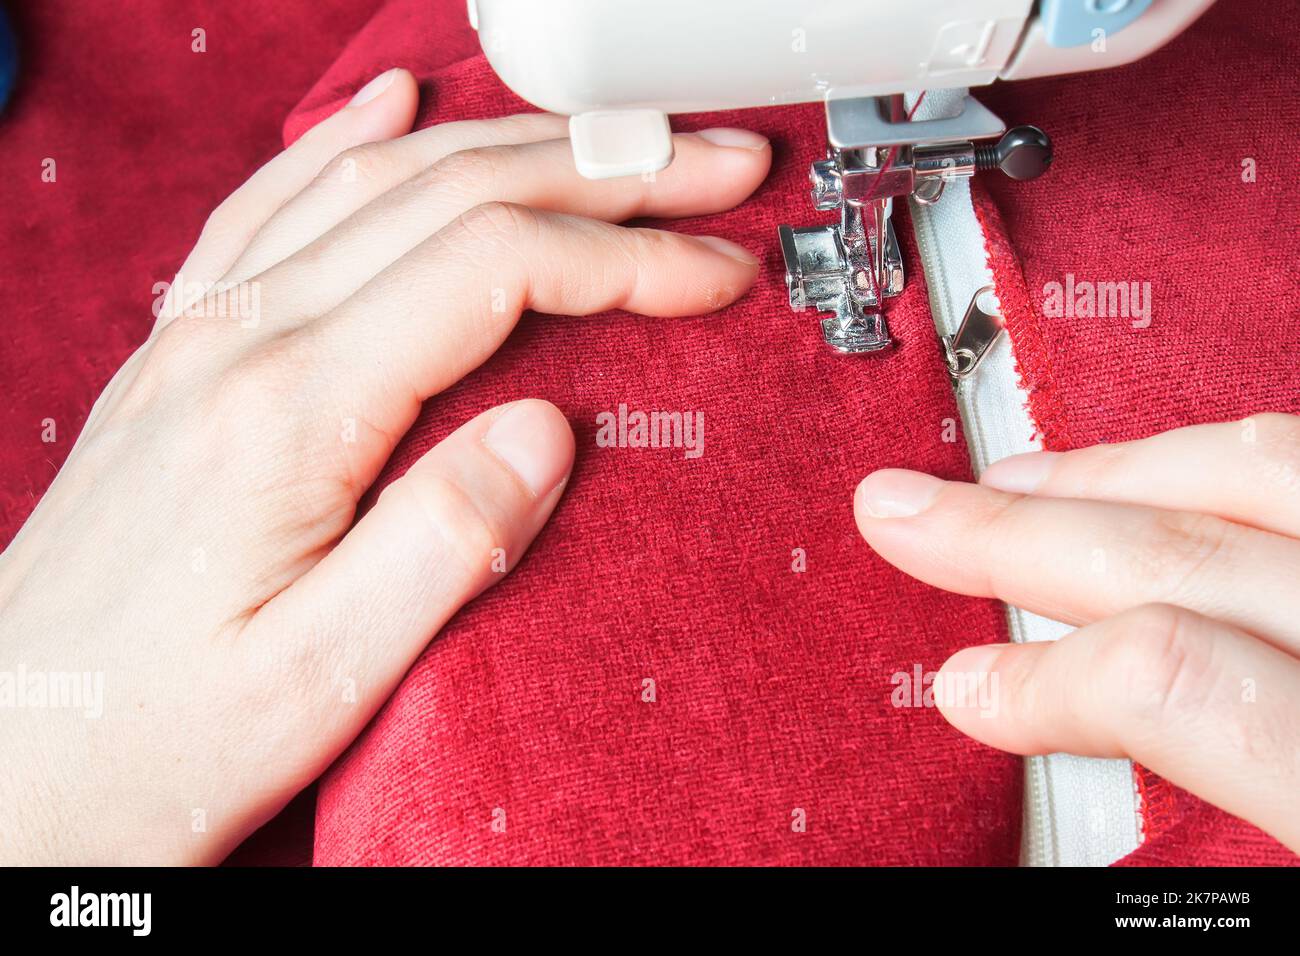 seamstress hands sew on the zipper on red item of clothing by modern sewing machine with special presser foot. sewing process Stock Photo